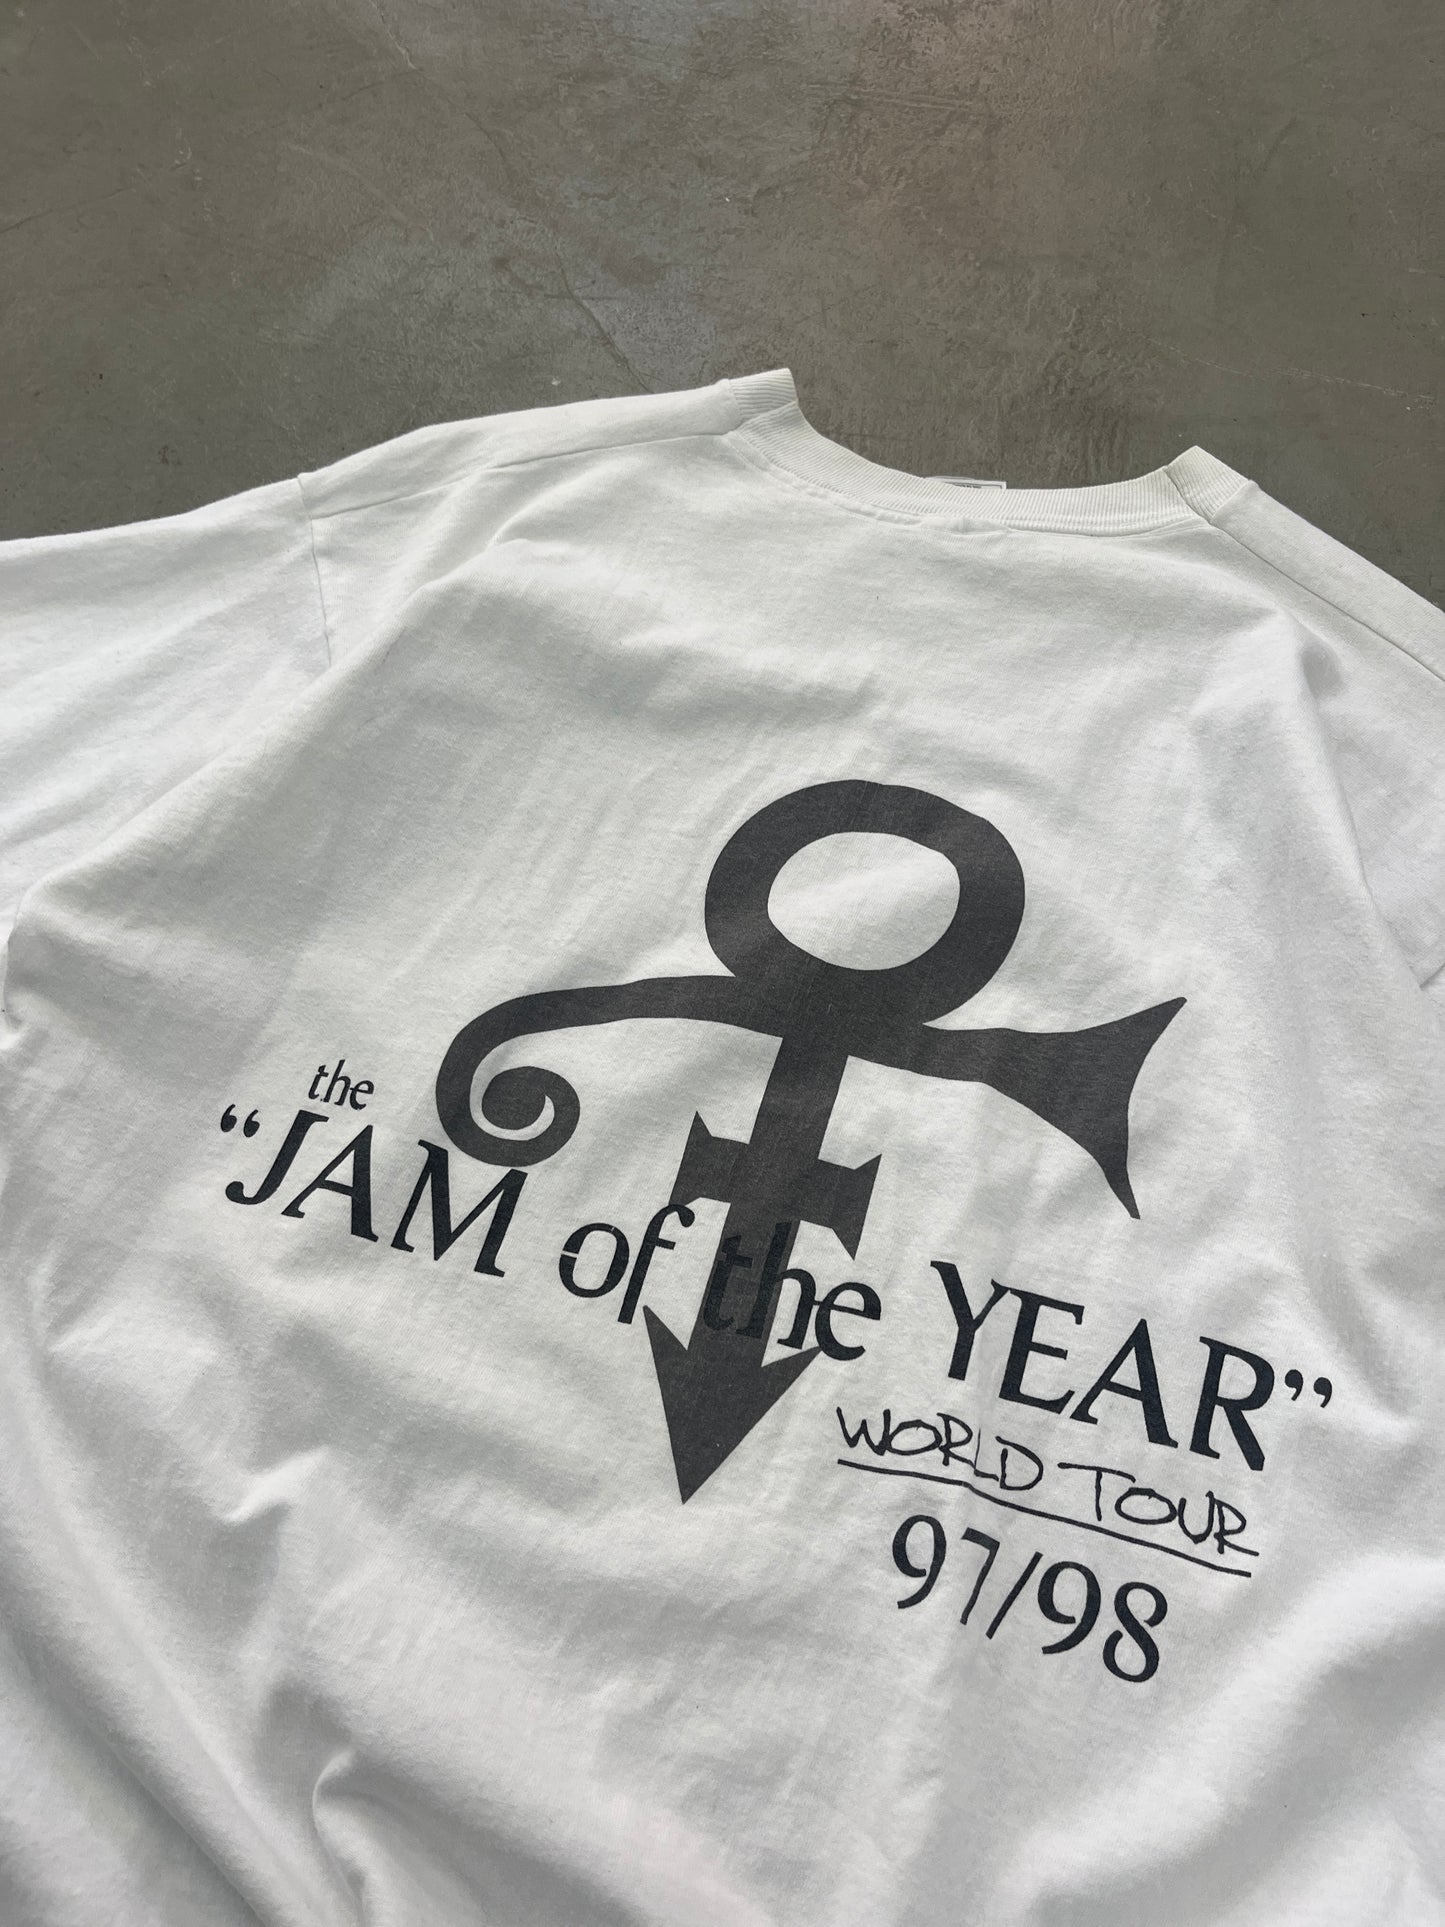 PRINCE JAM OF THE YEAR 97/98 [XL]